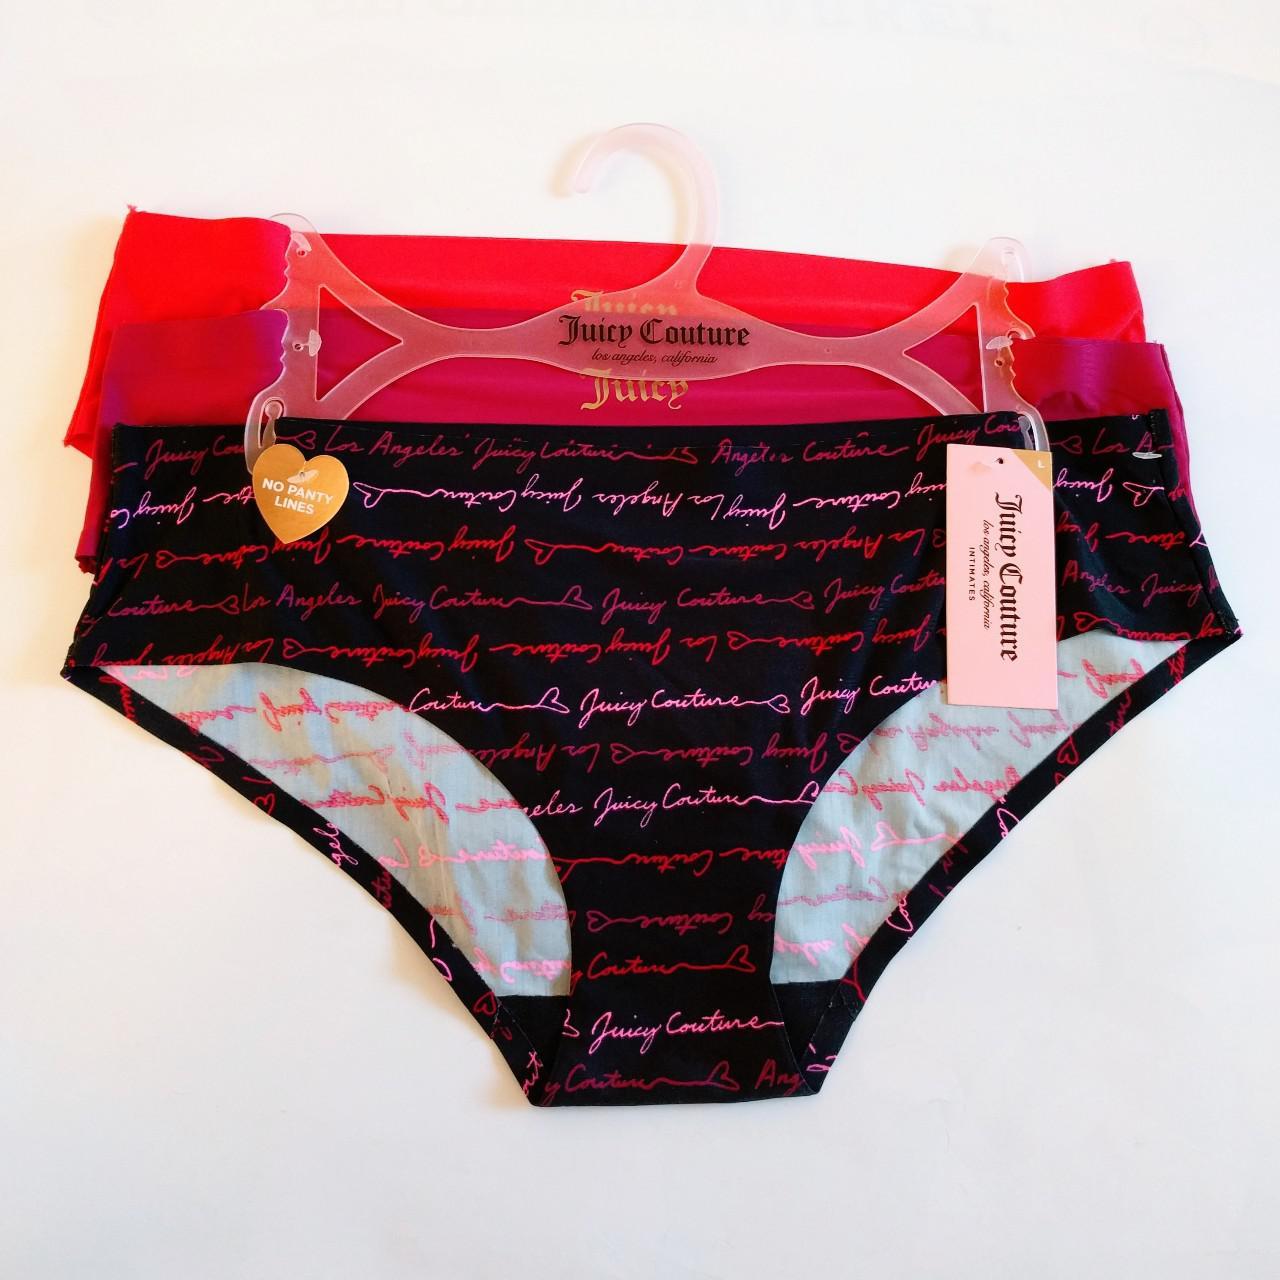 Authentic Juicy Couture Women Panties available for purchase Cost: $1,200/  each Send us a DM to place order. We deliver island wide v